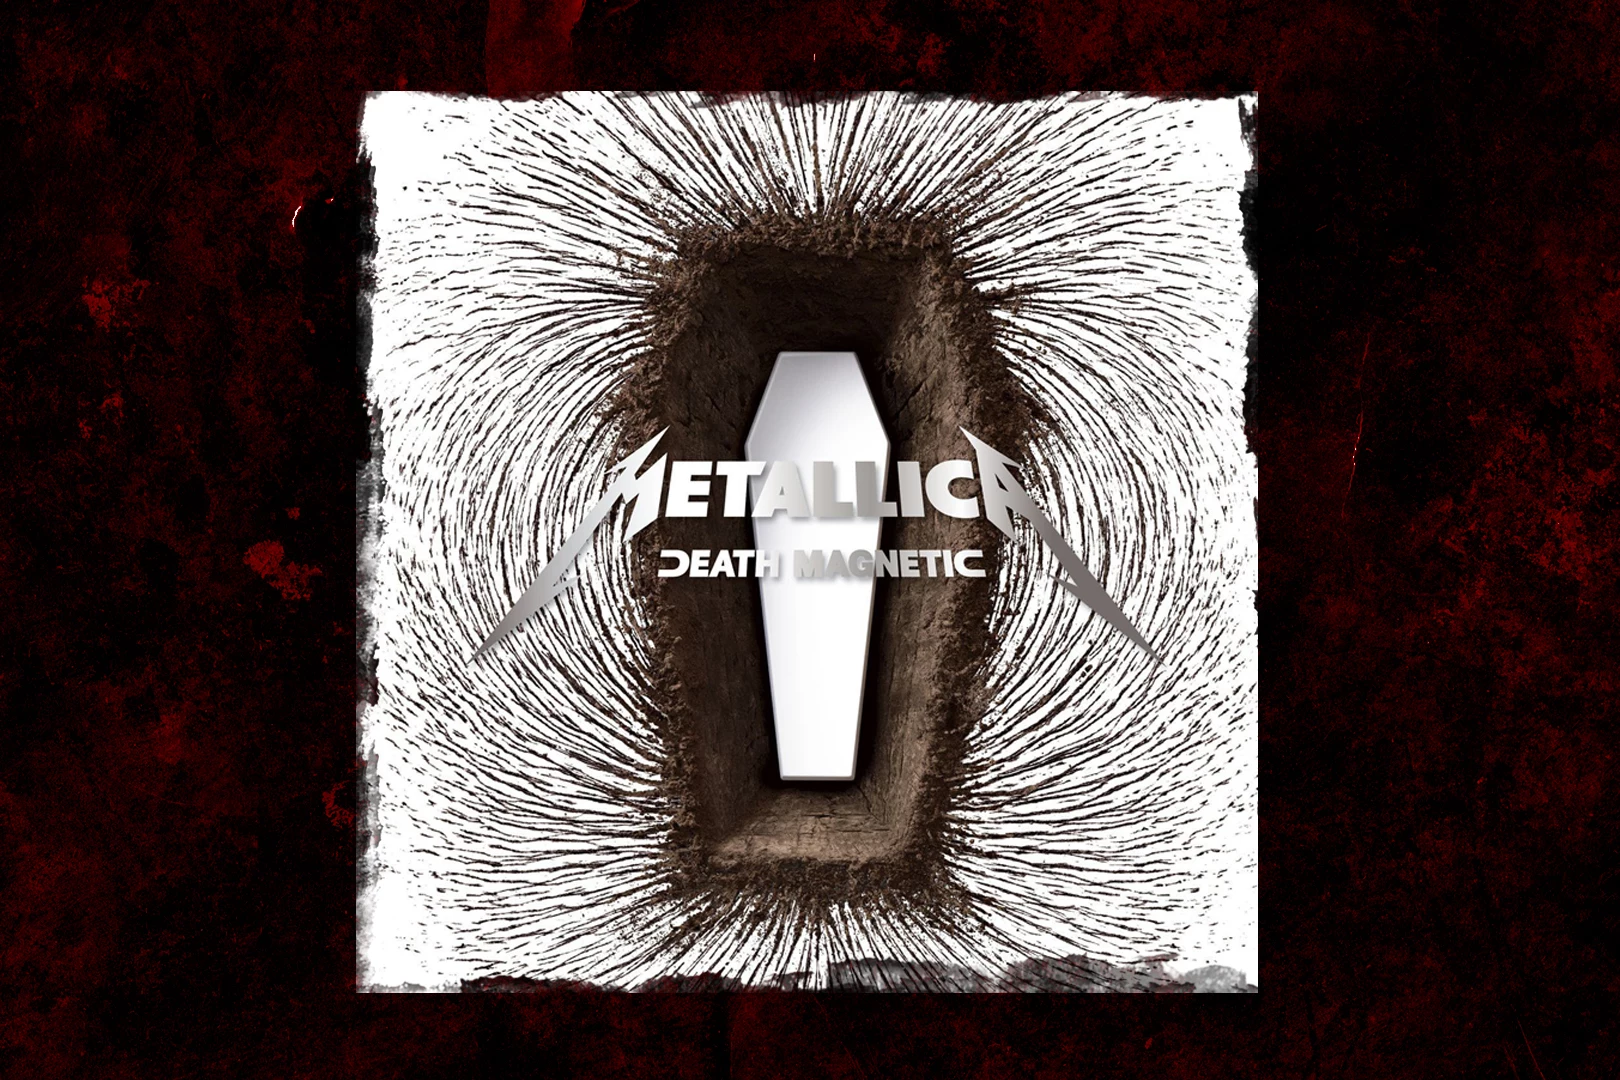 15 Years Ago: Metallica Release 'Death Magnetic'